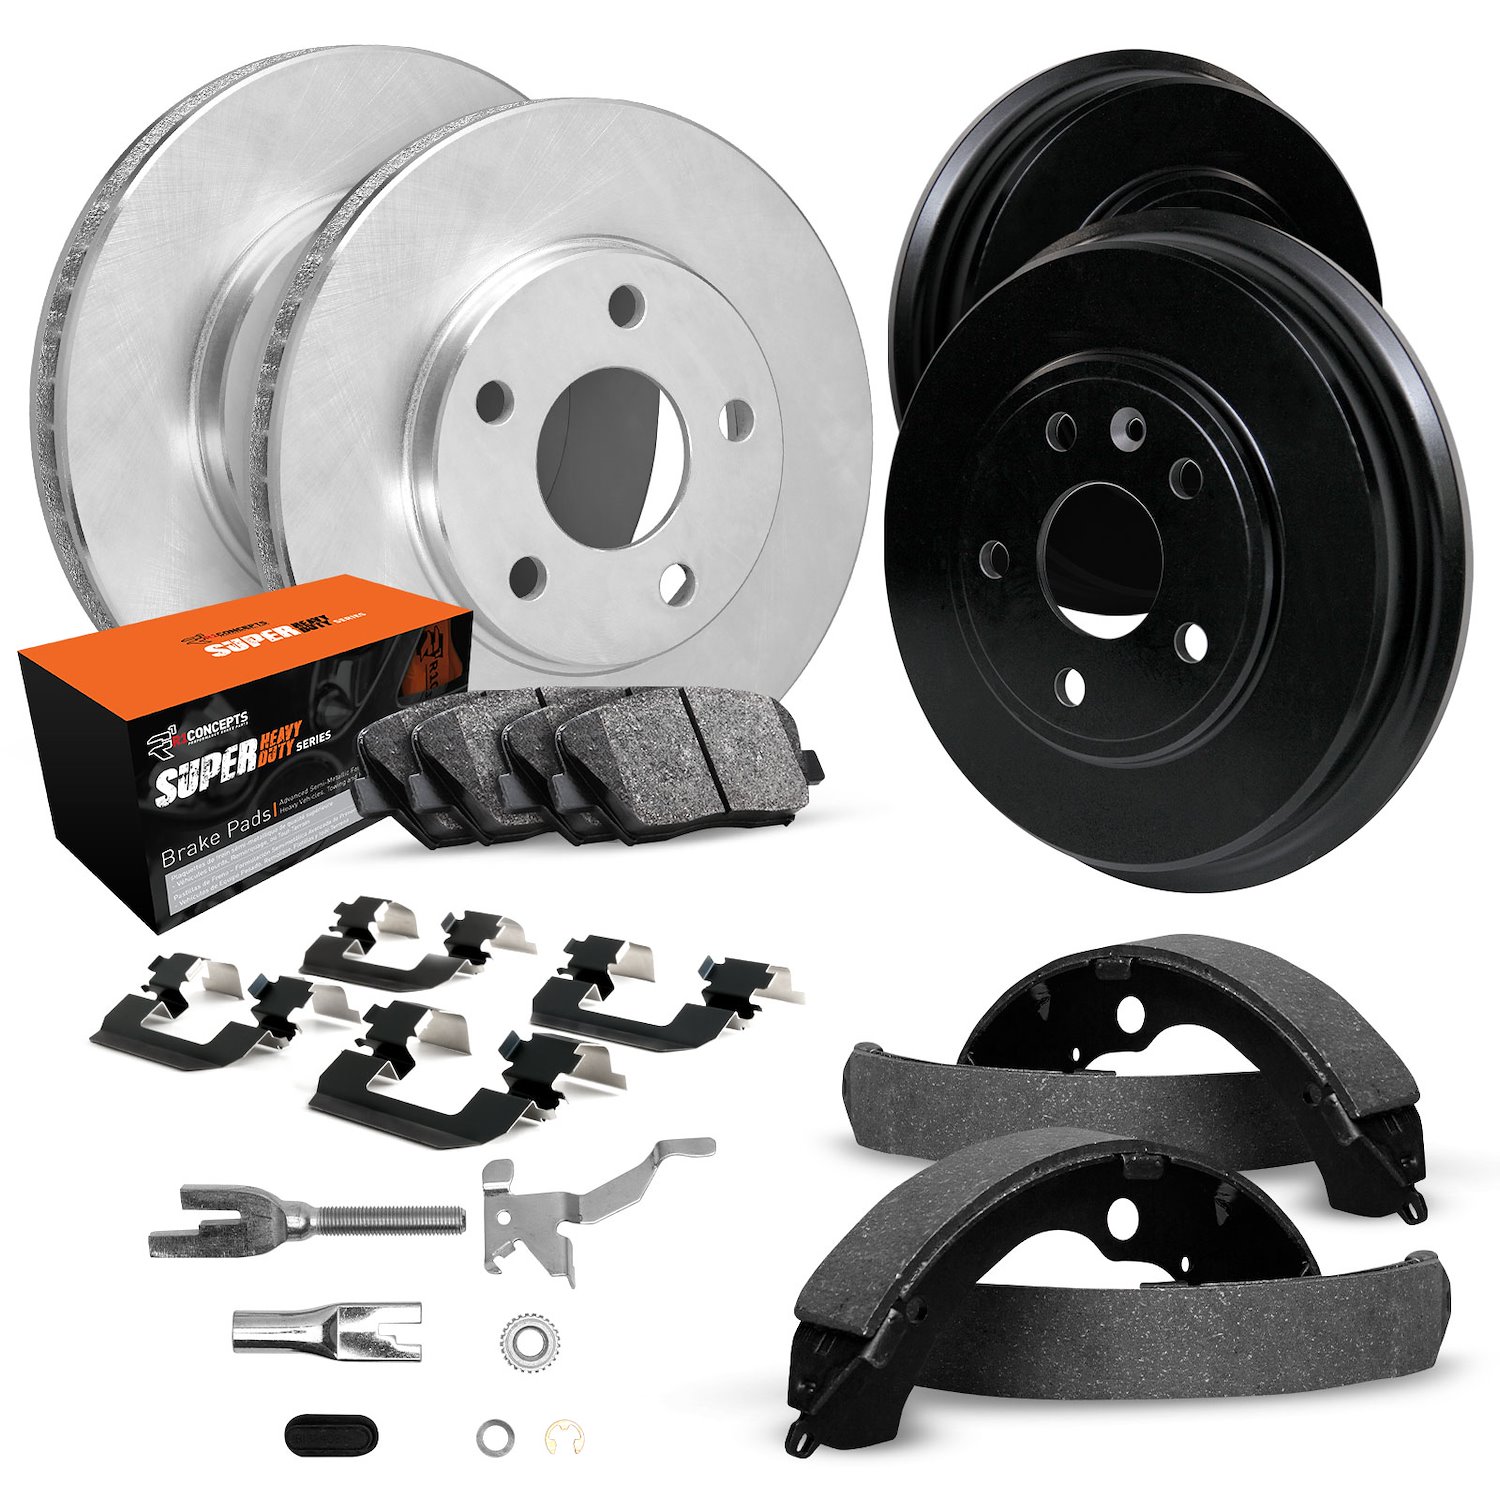 E-Line Blank Brake Rotor & Drum Set w/Super-Duty Pads, Shoes, Hardware, & Adjusters, 1983-1989 GM, Position: Front & Rear